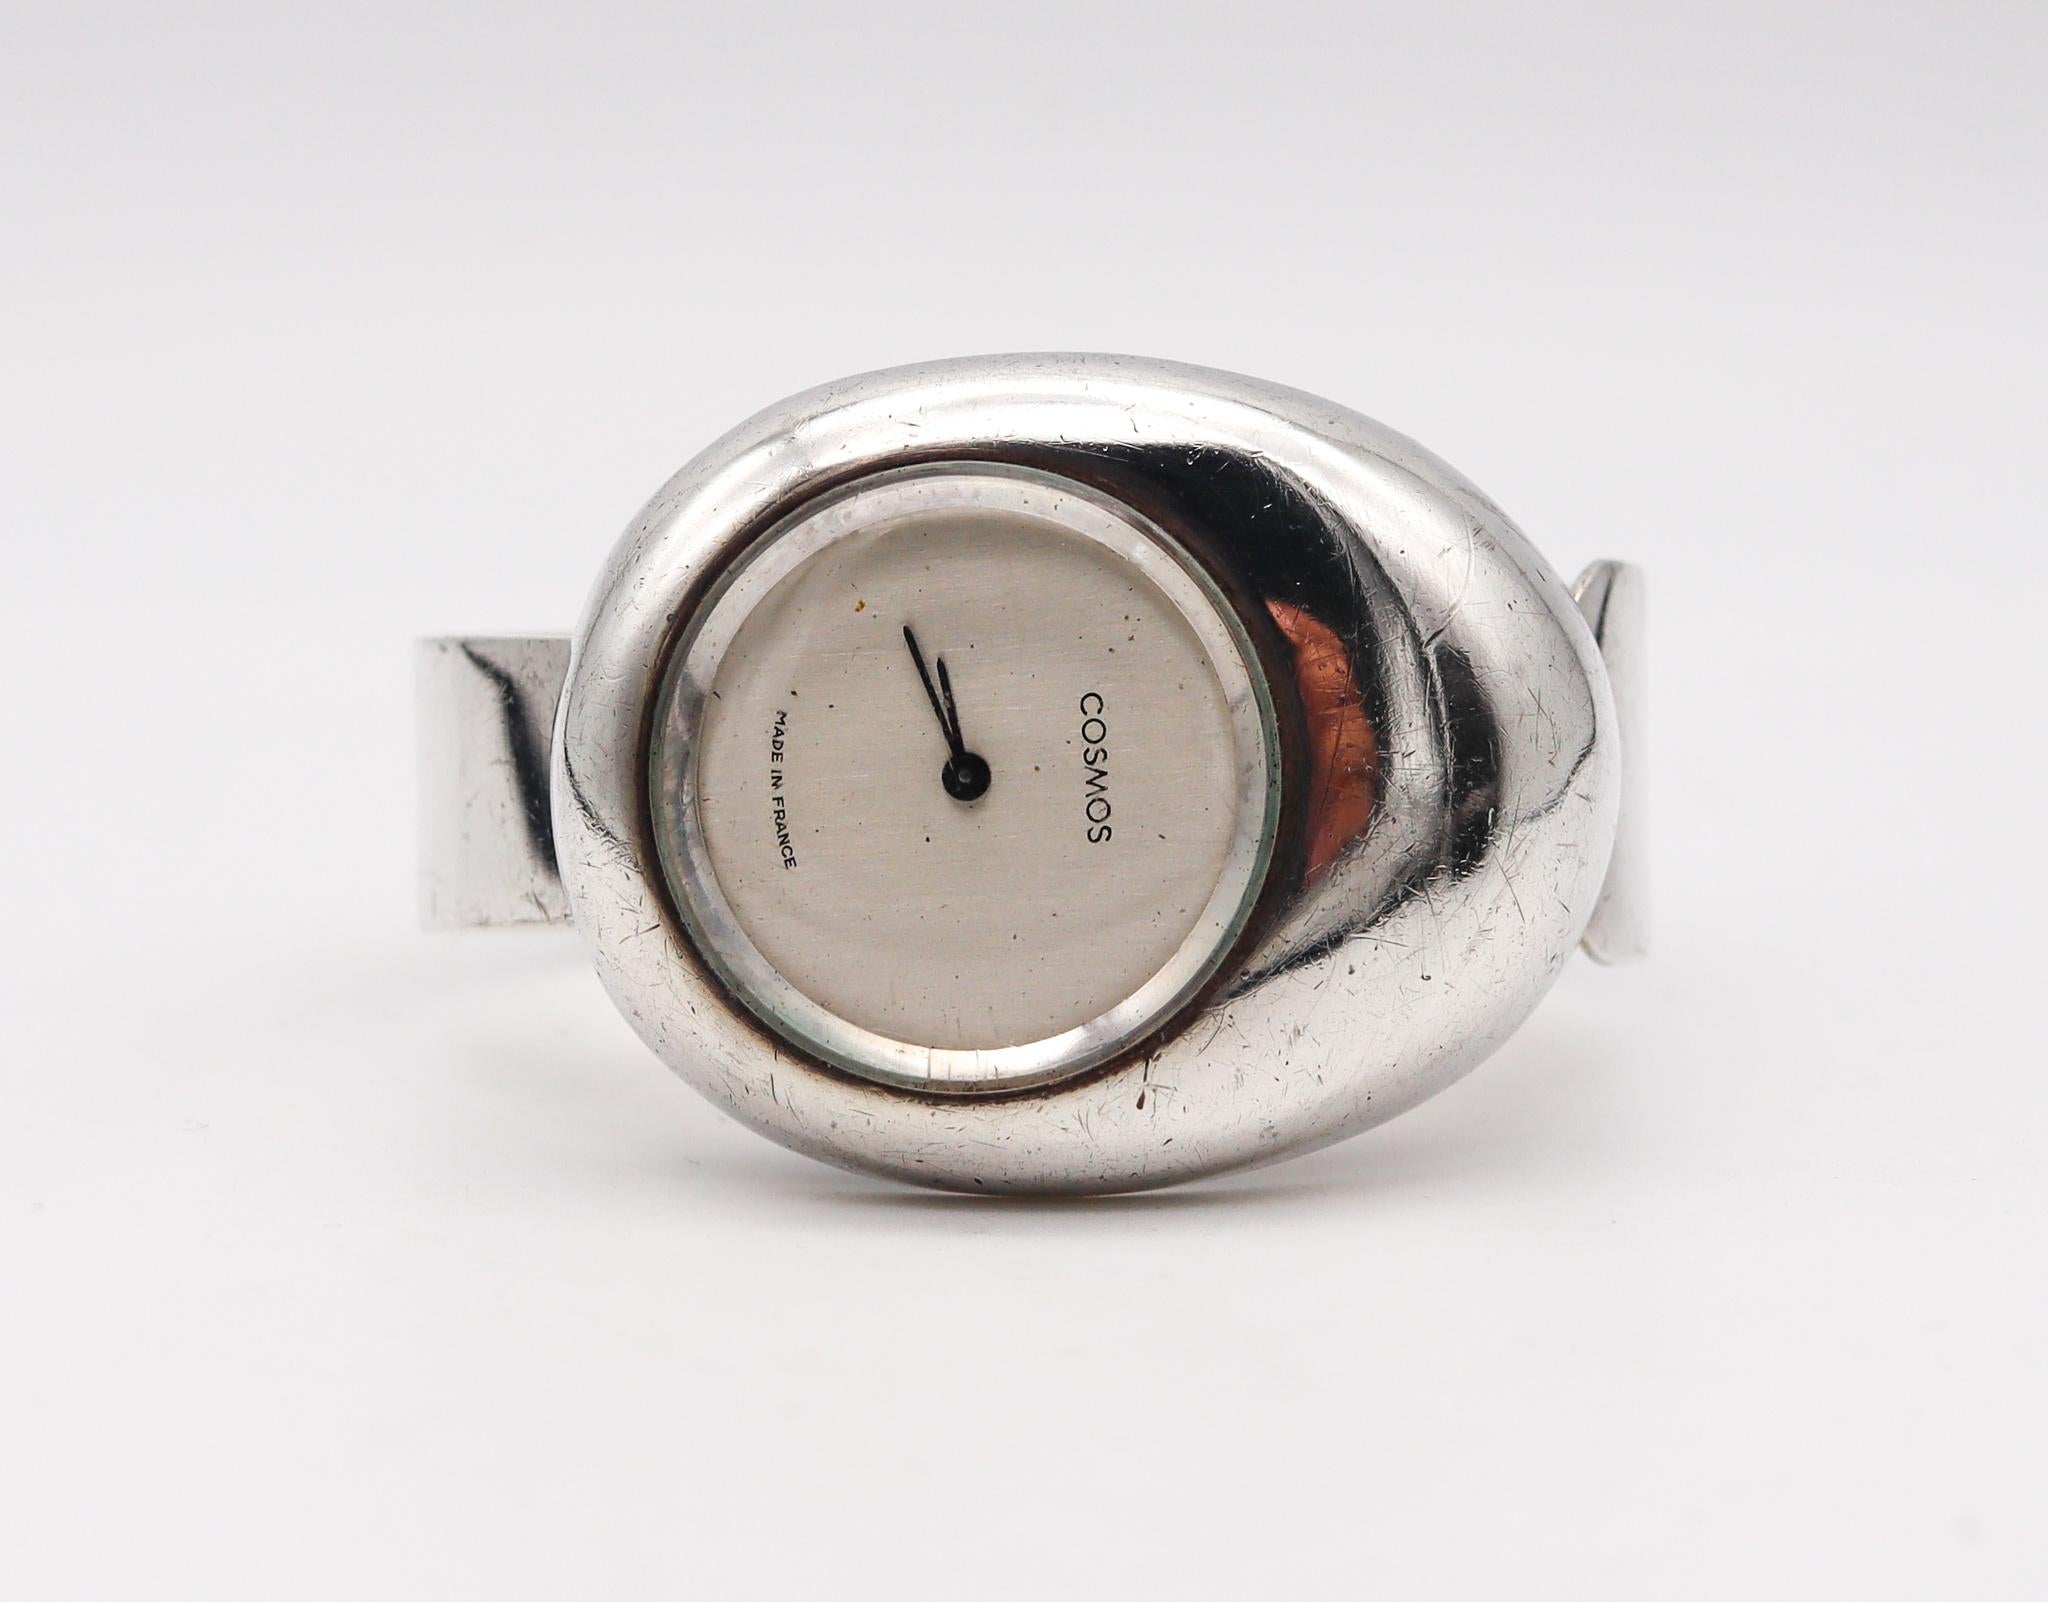 A retro wrist watch cuff designed by Cosmos Paris.

Beautiful vintage cuff bracelet wristwatch, created in Paris France by Cosmos, back in the 1973. This sculptural retro piece has been crafted with space era patterns in solid sterling silver